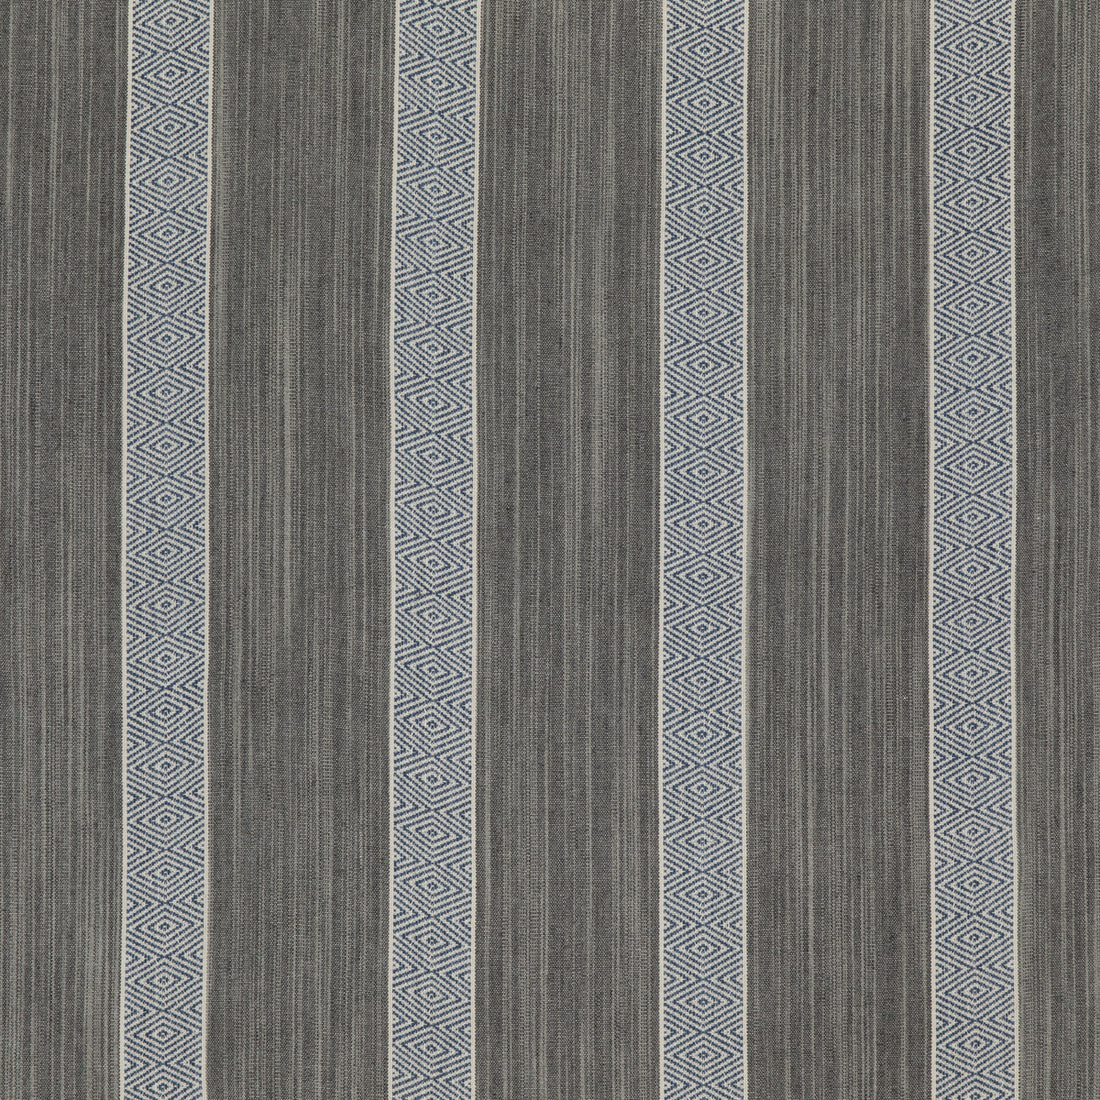 Rexford fabric in indigo color - pattern ED85305.680.0 - by Threads in the Great Stripes collection